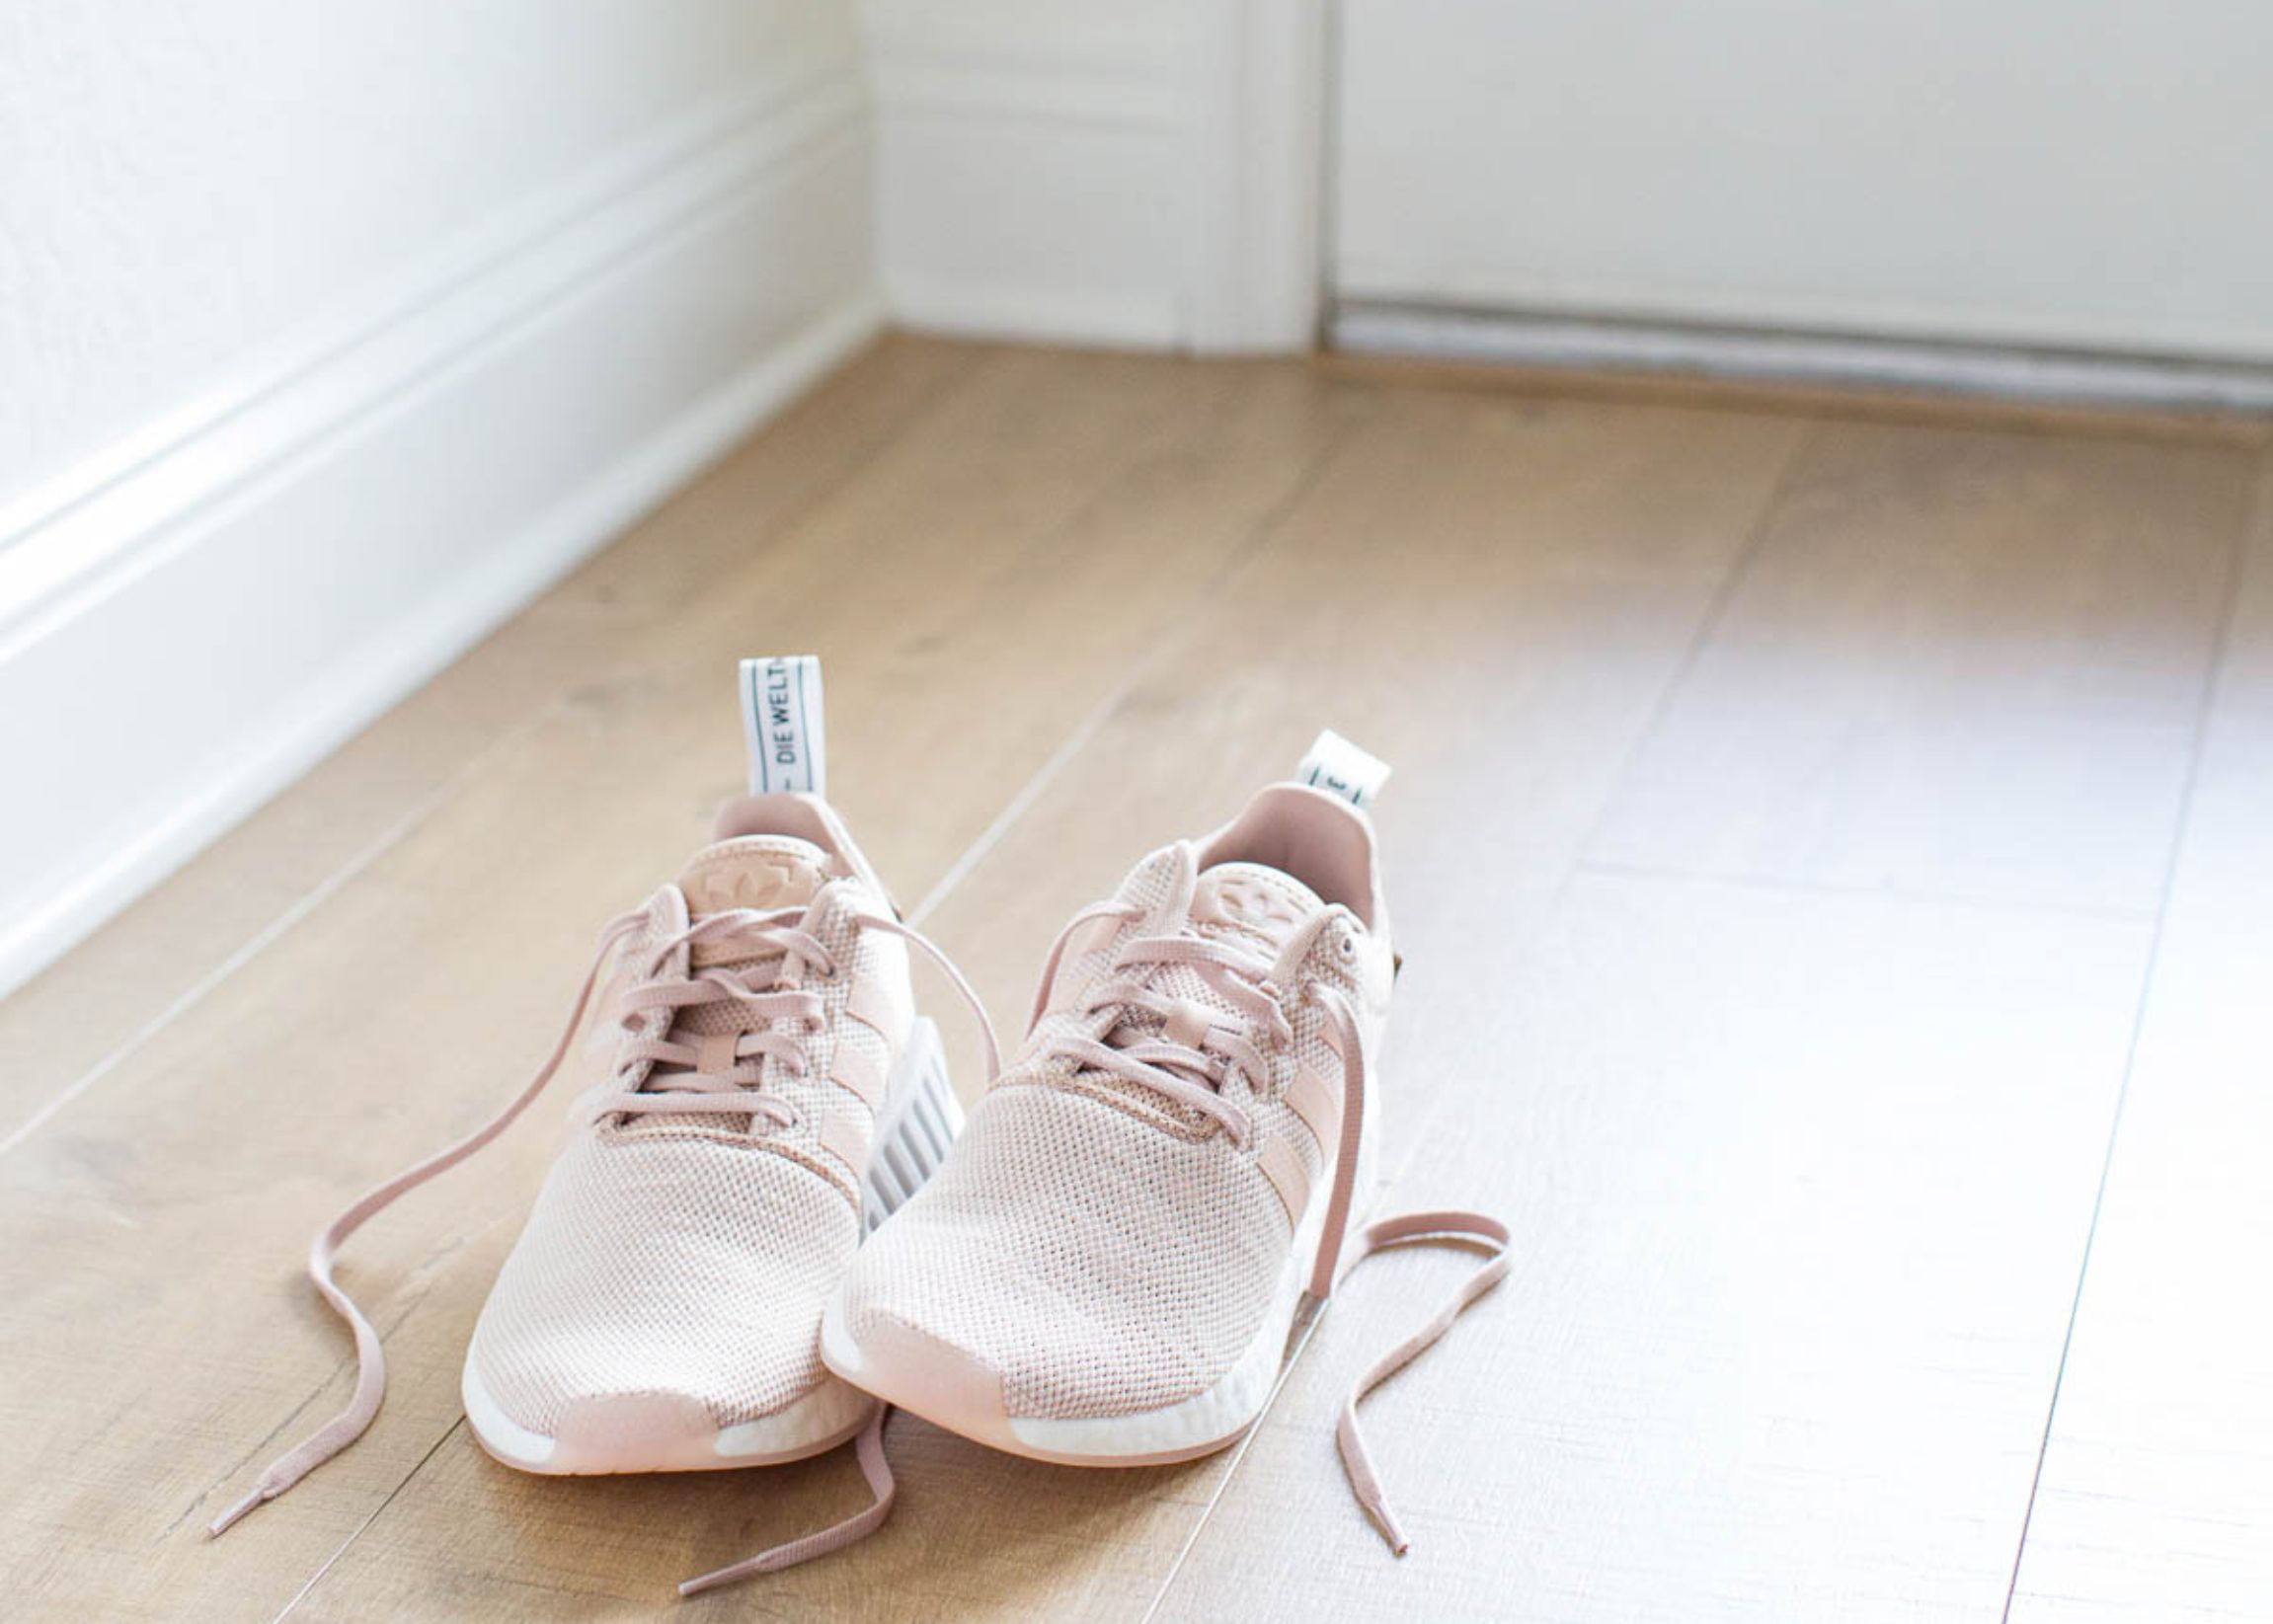 Running shoes on hardwood floor by door creating a visual cue to build better habits